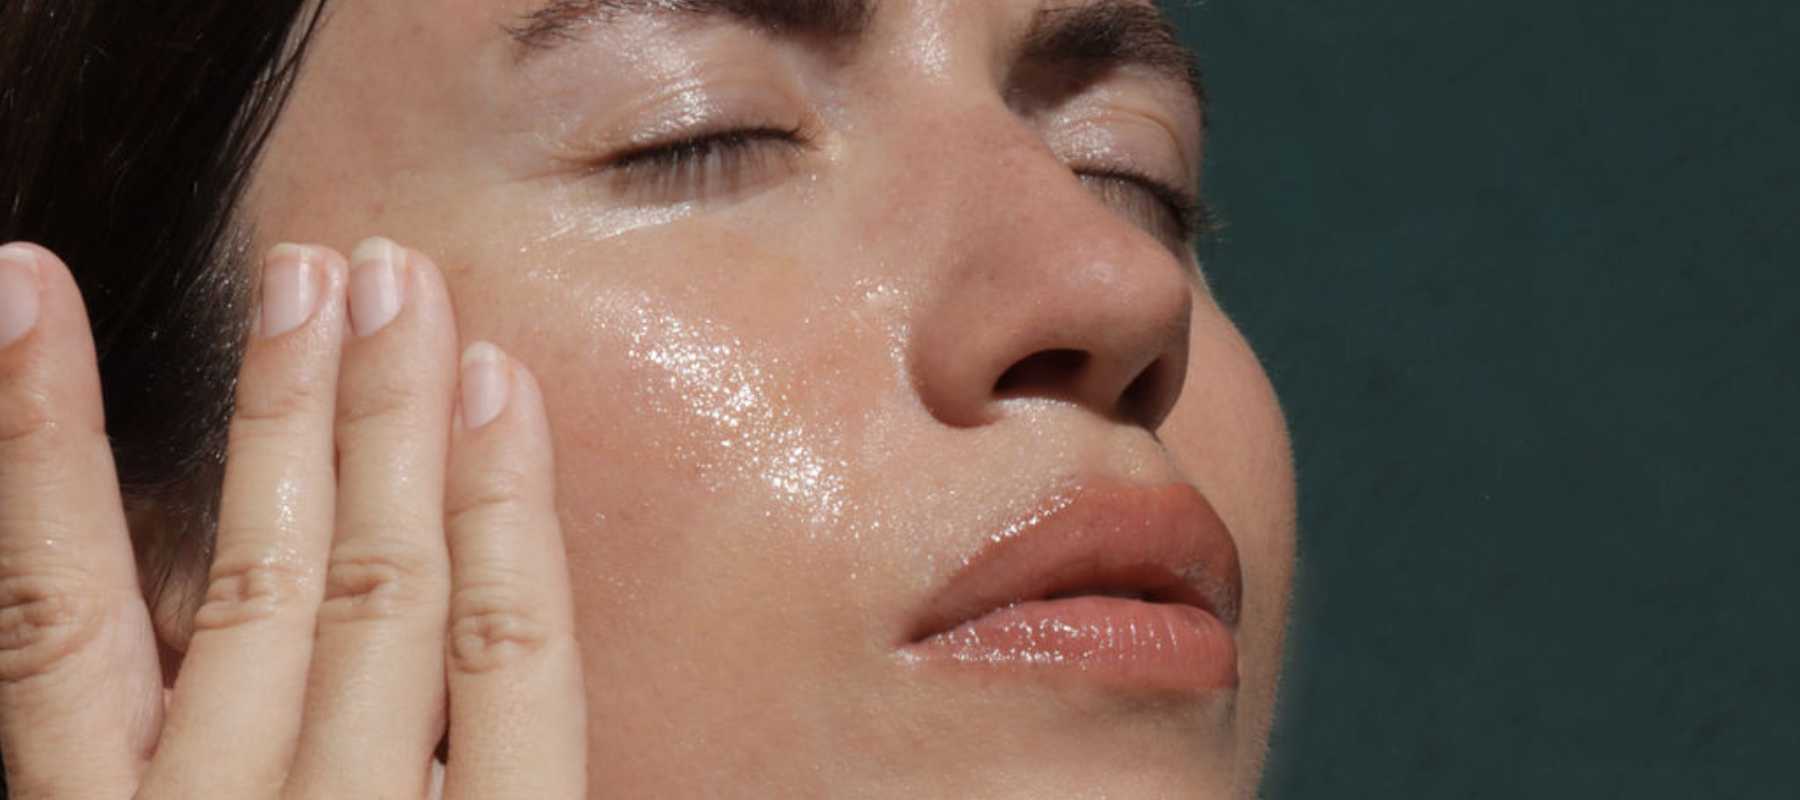 Natural skincare for sensitive skin. Take a minimalist approach to manage rosacea, eczema and hypersensitive skin and transform it to calm, glowing skin.